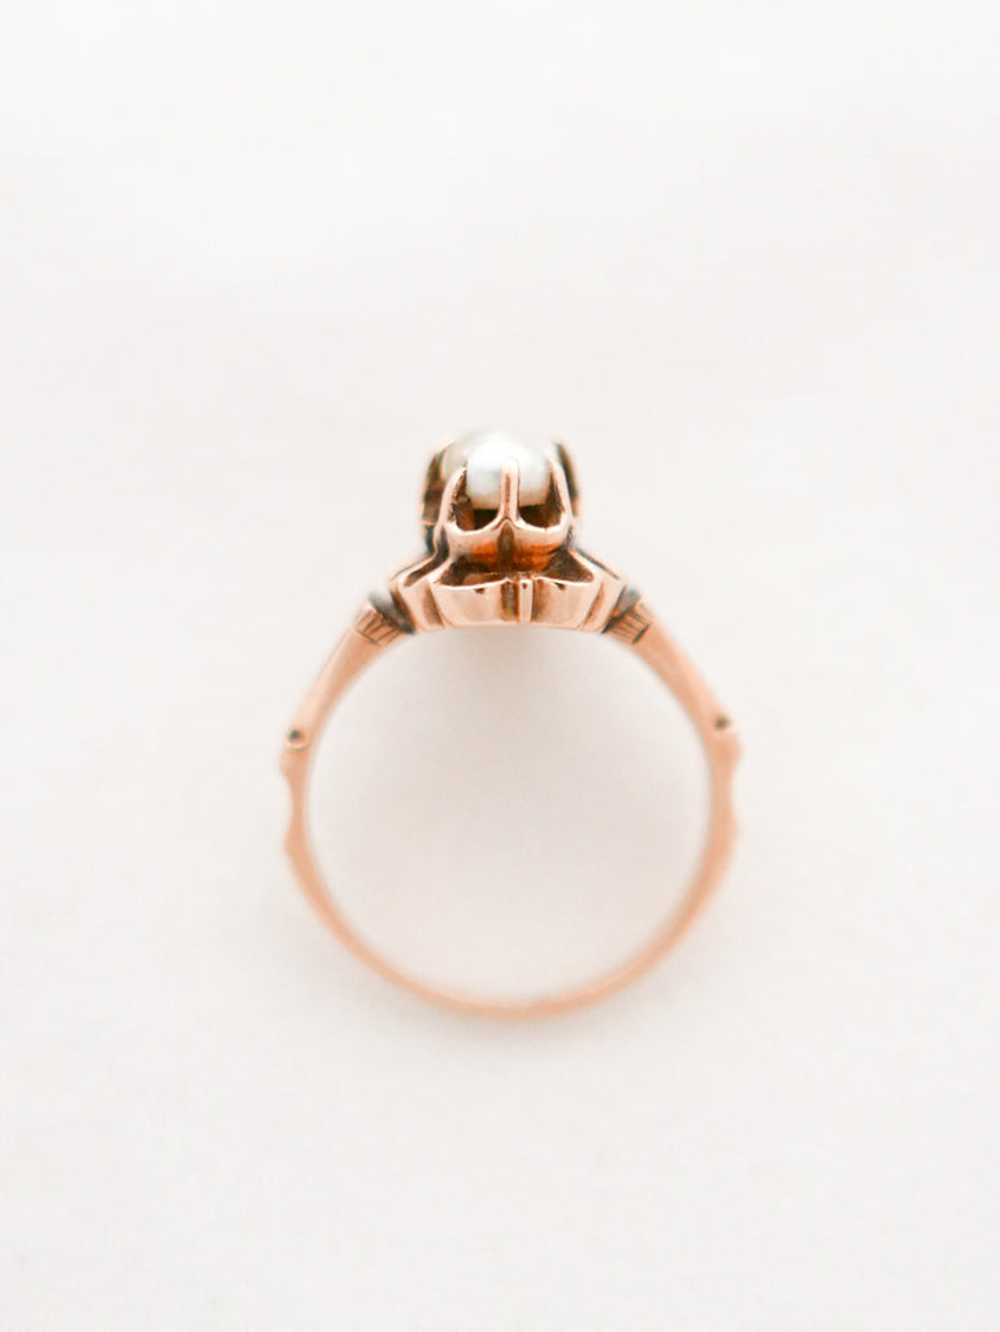 Antique 14K Gold Triple Pearl Ring - image 5